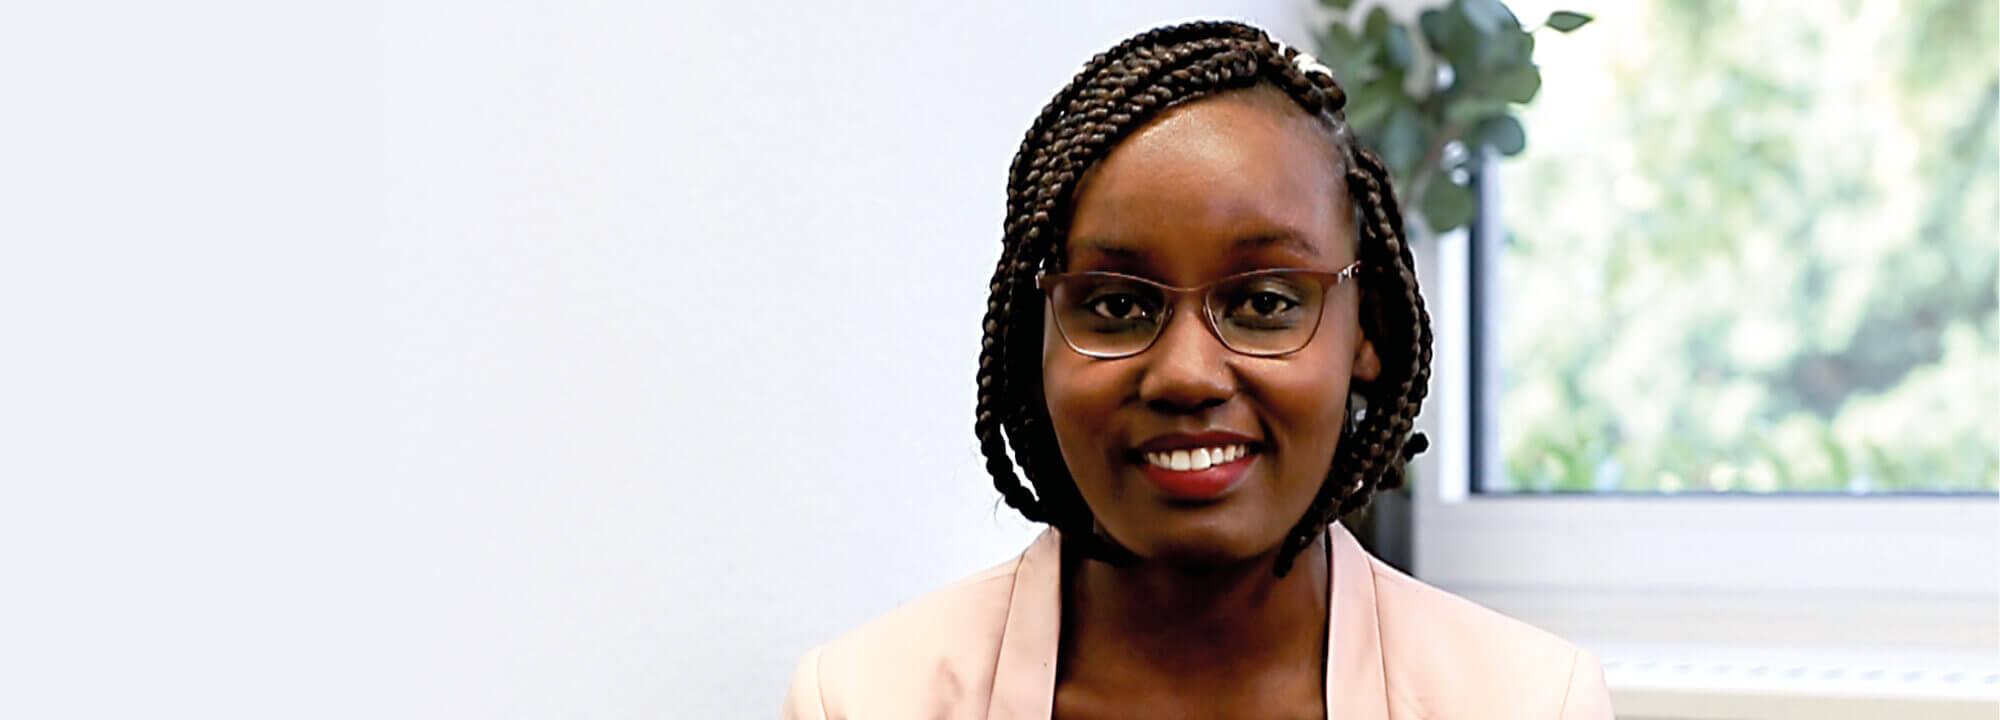 Experience as an international student at CBS - Lavender Achieng Otieno